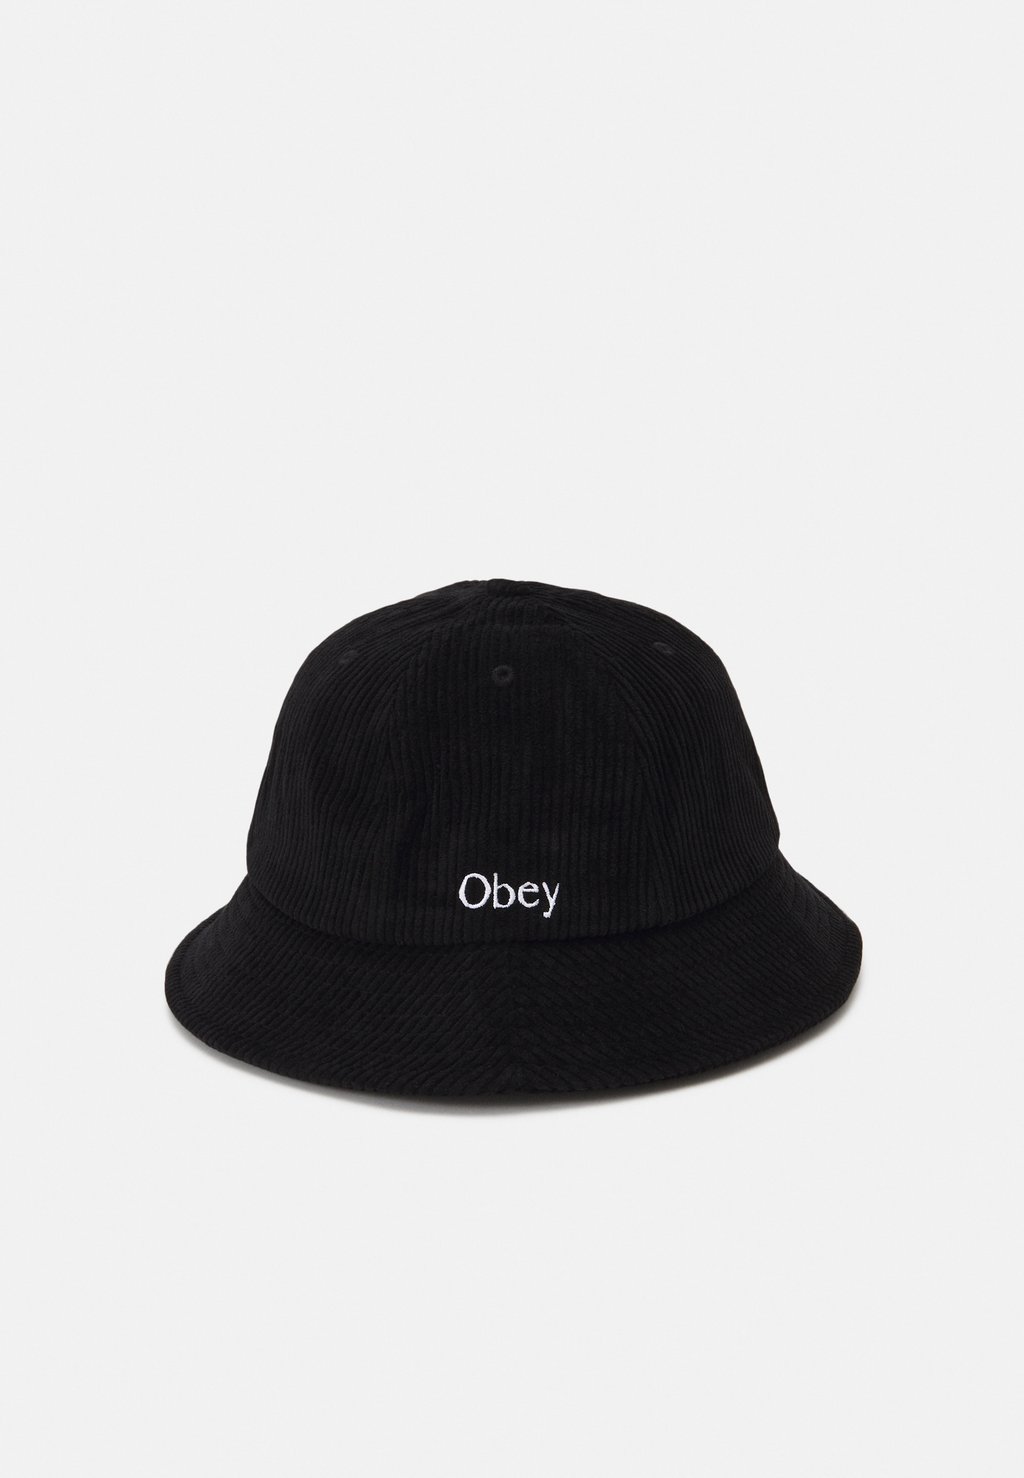 Шапка ONE TWO UNISEX Obey Clothing, черный шапка gemma beanie unisex obey clothing черный